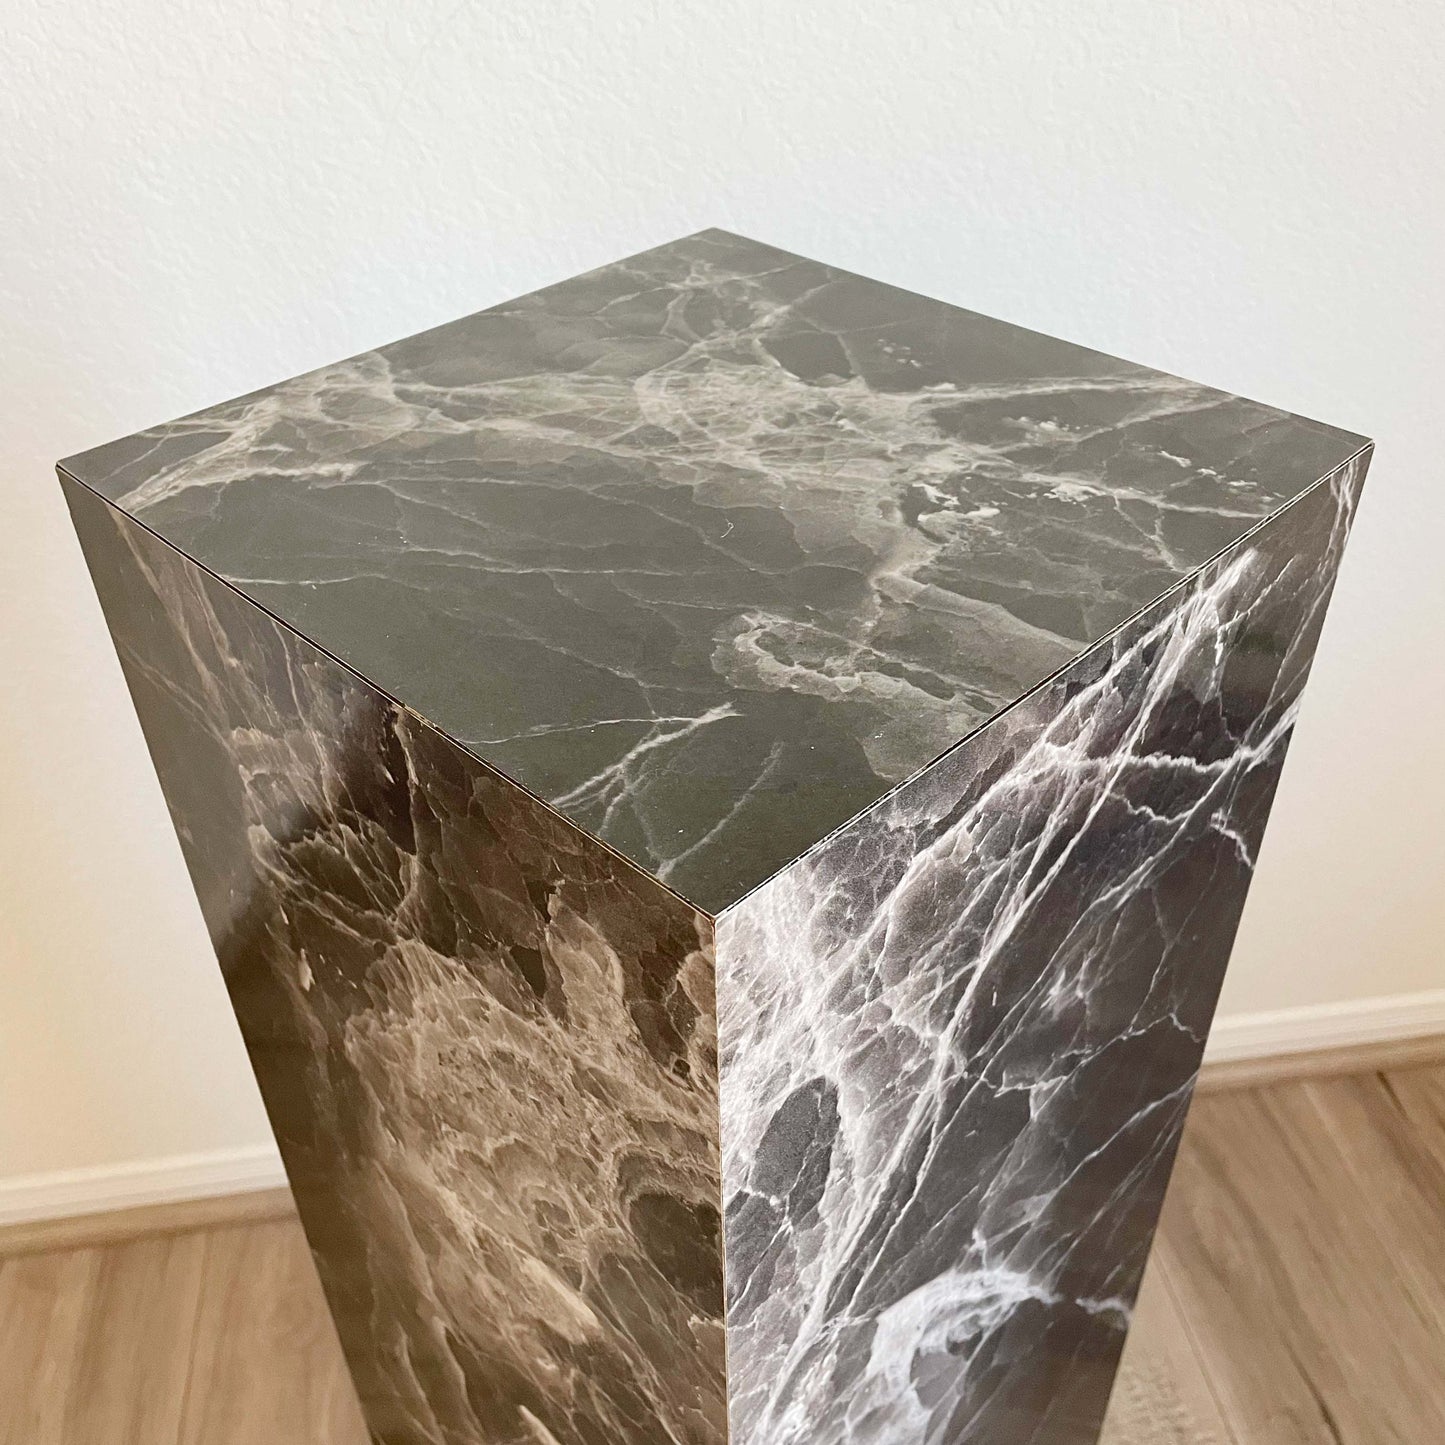 Vintage Faux Marble Pedestal: See Shipping Details